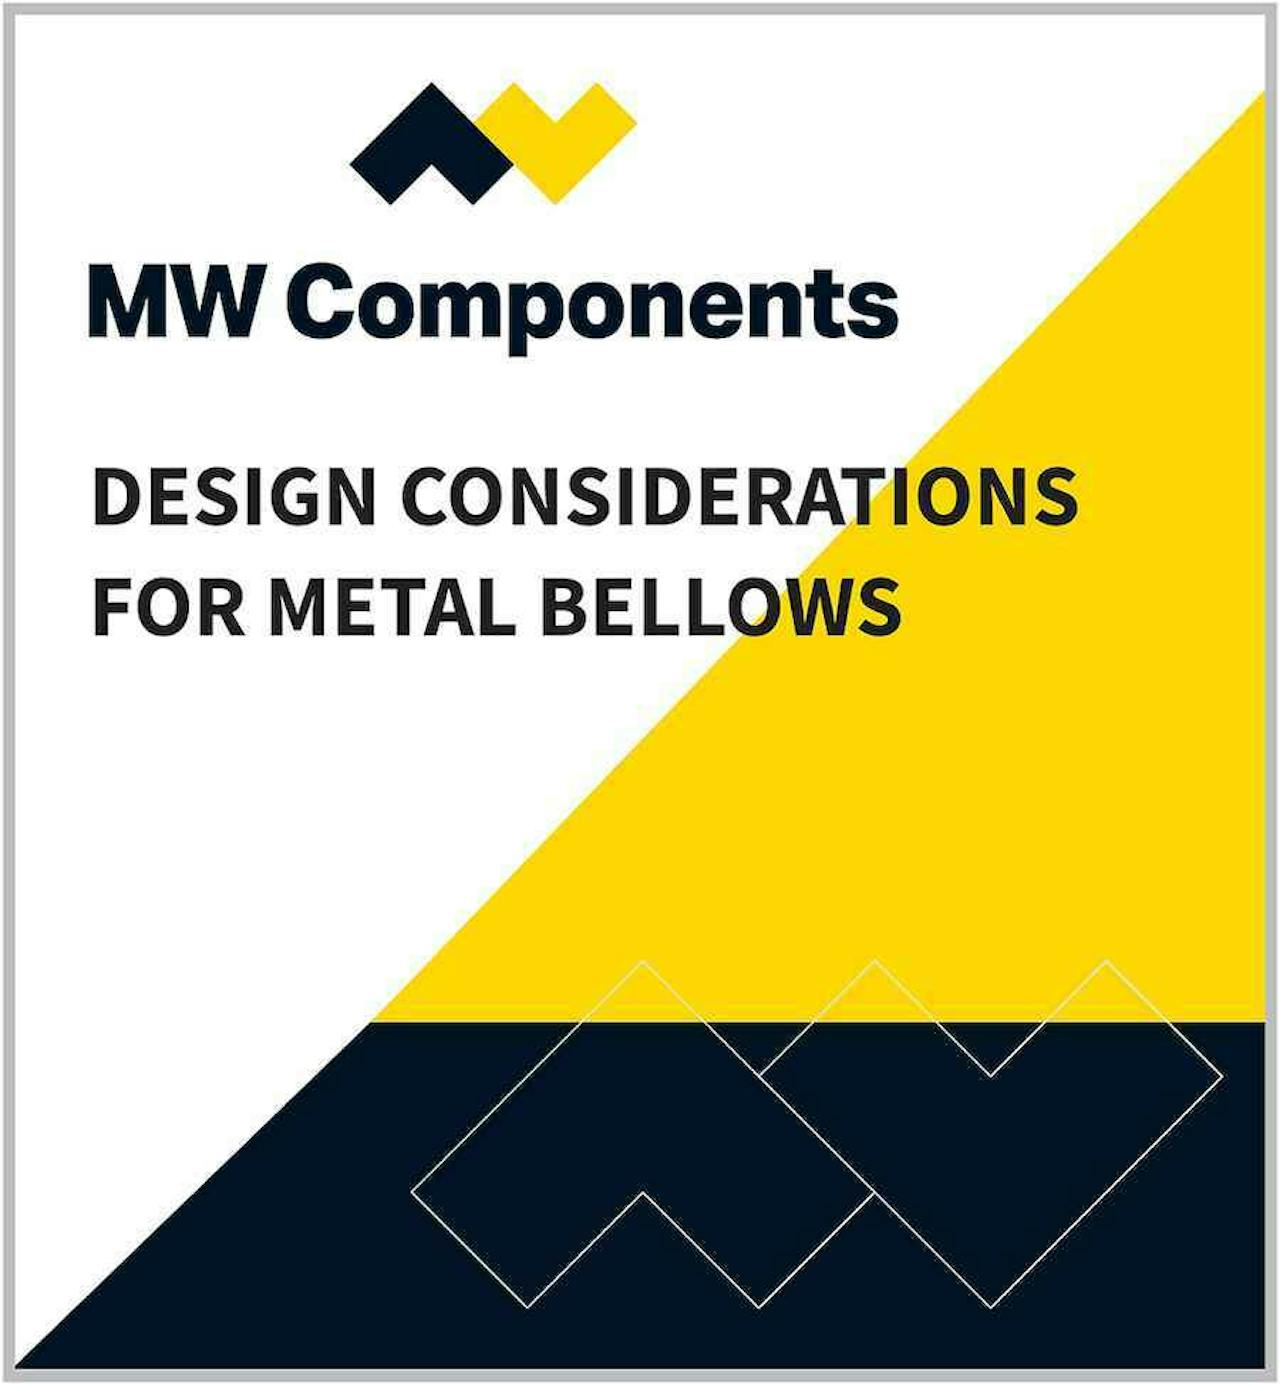 MWC Design Considerations for Metal Bellows